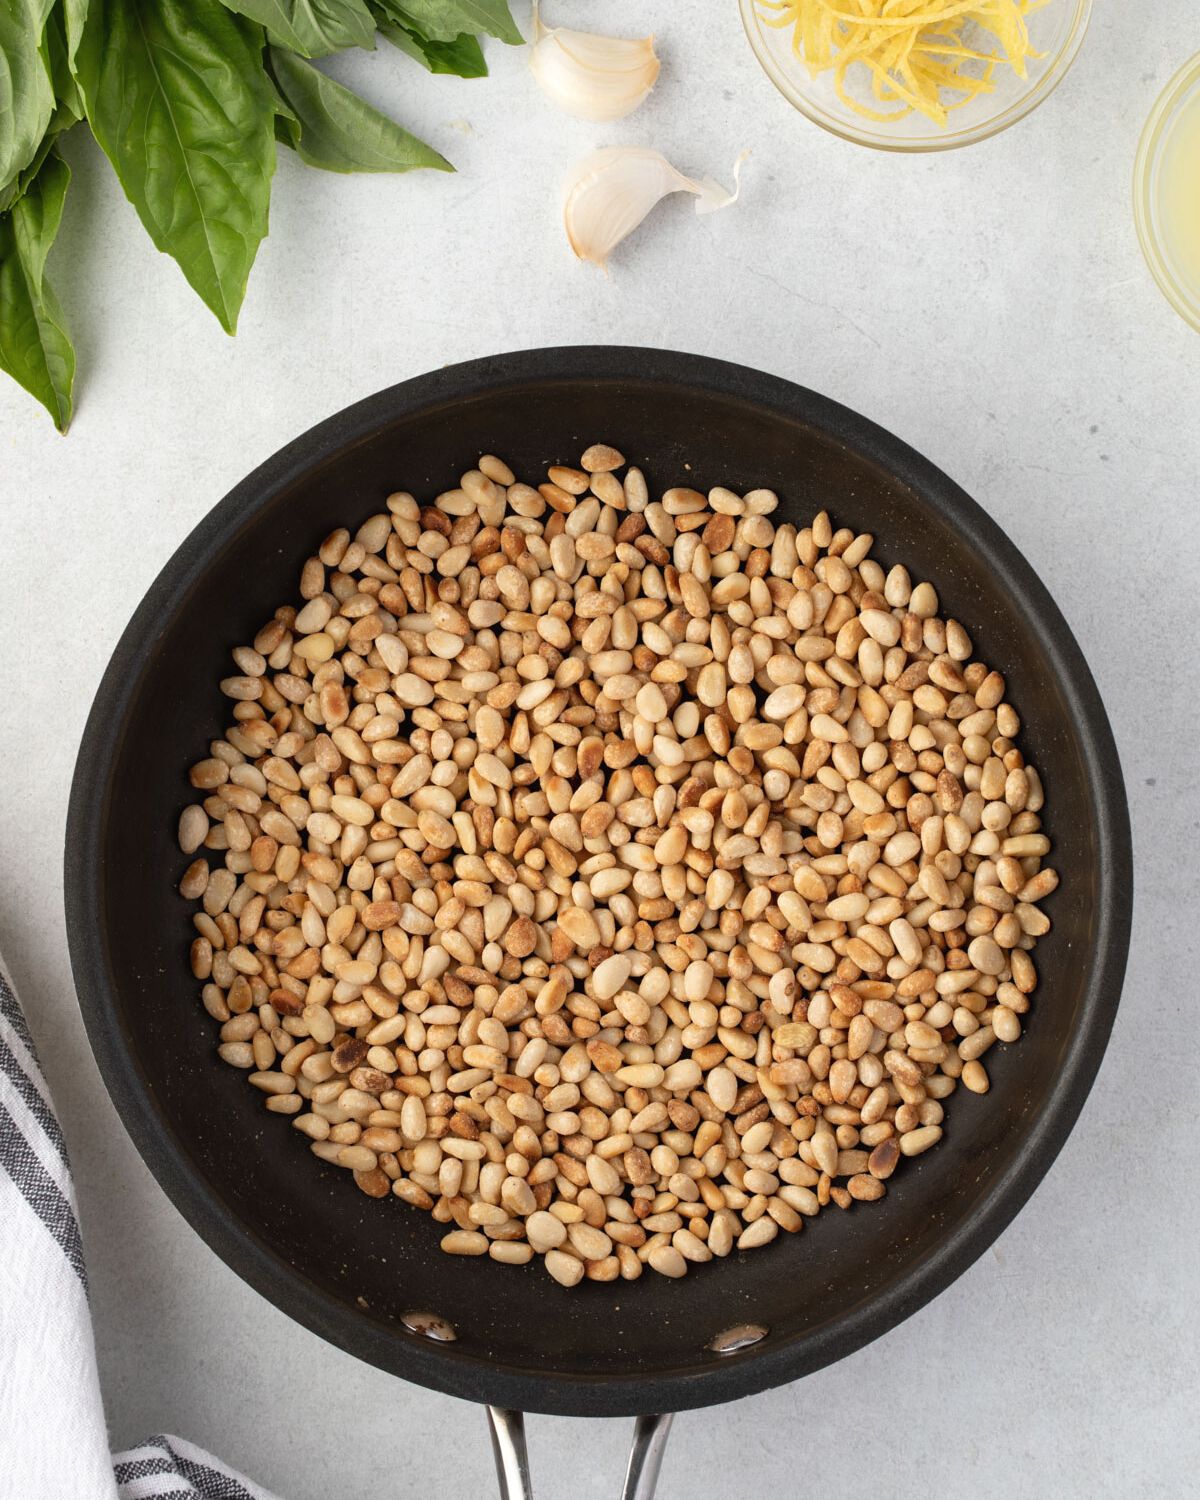 Toasted pinenuts in a skillet, with basil, garlic cloves, and lemon zest around it.